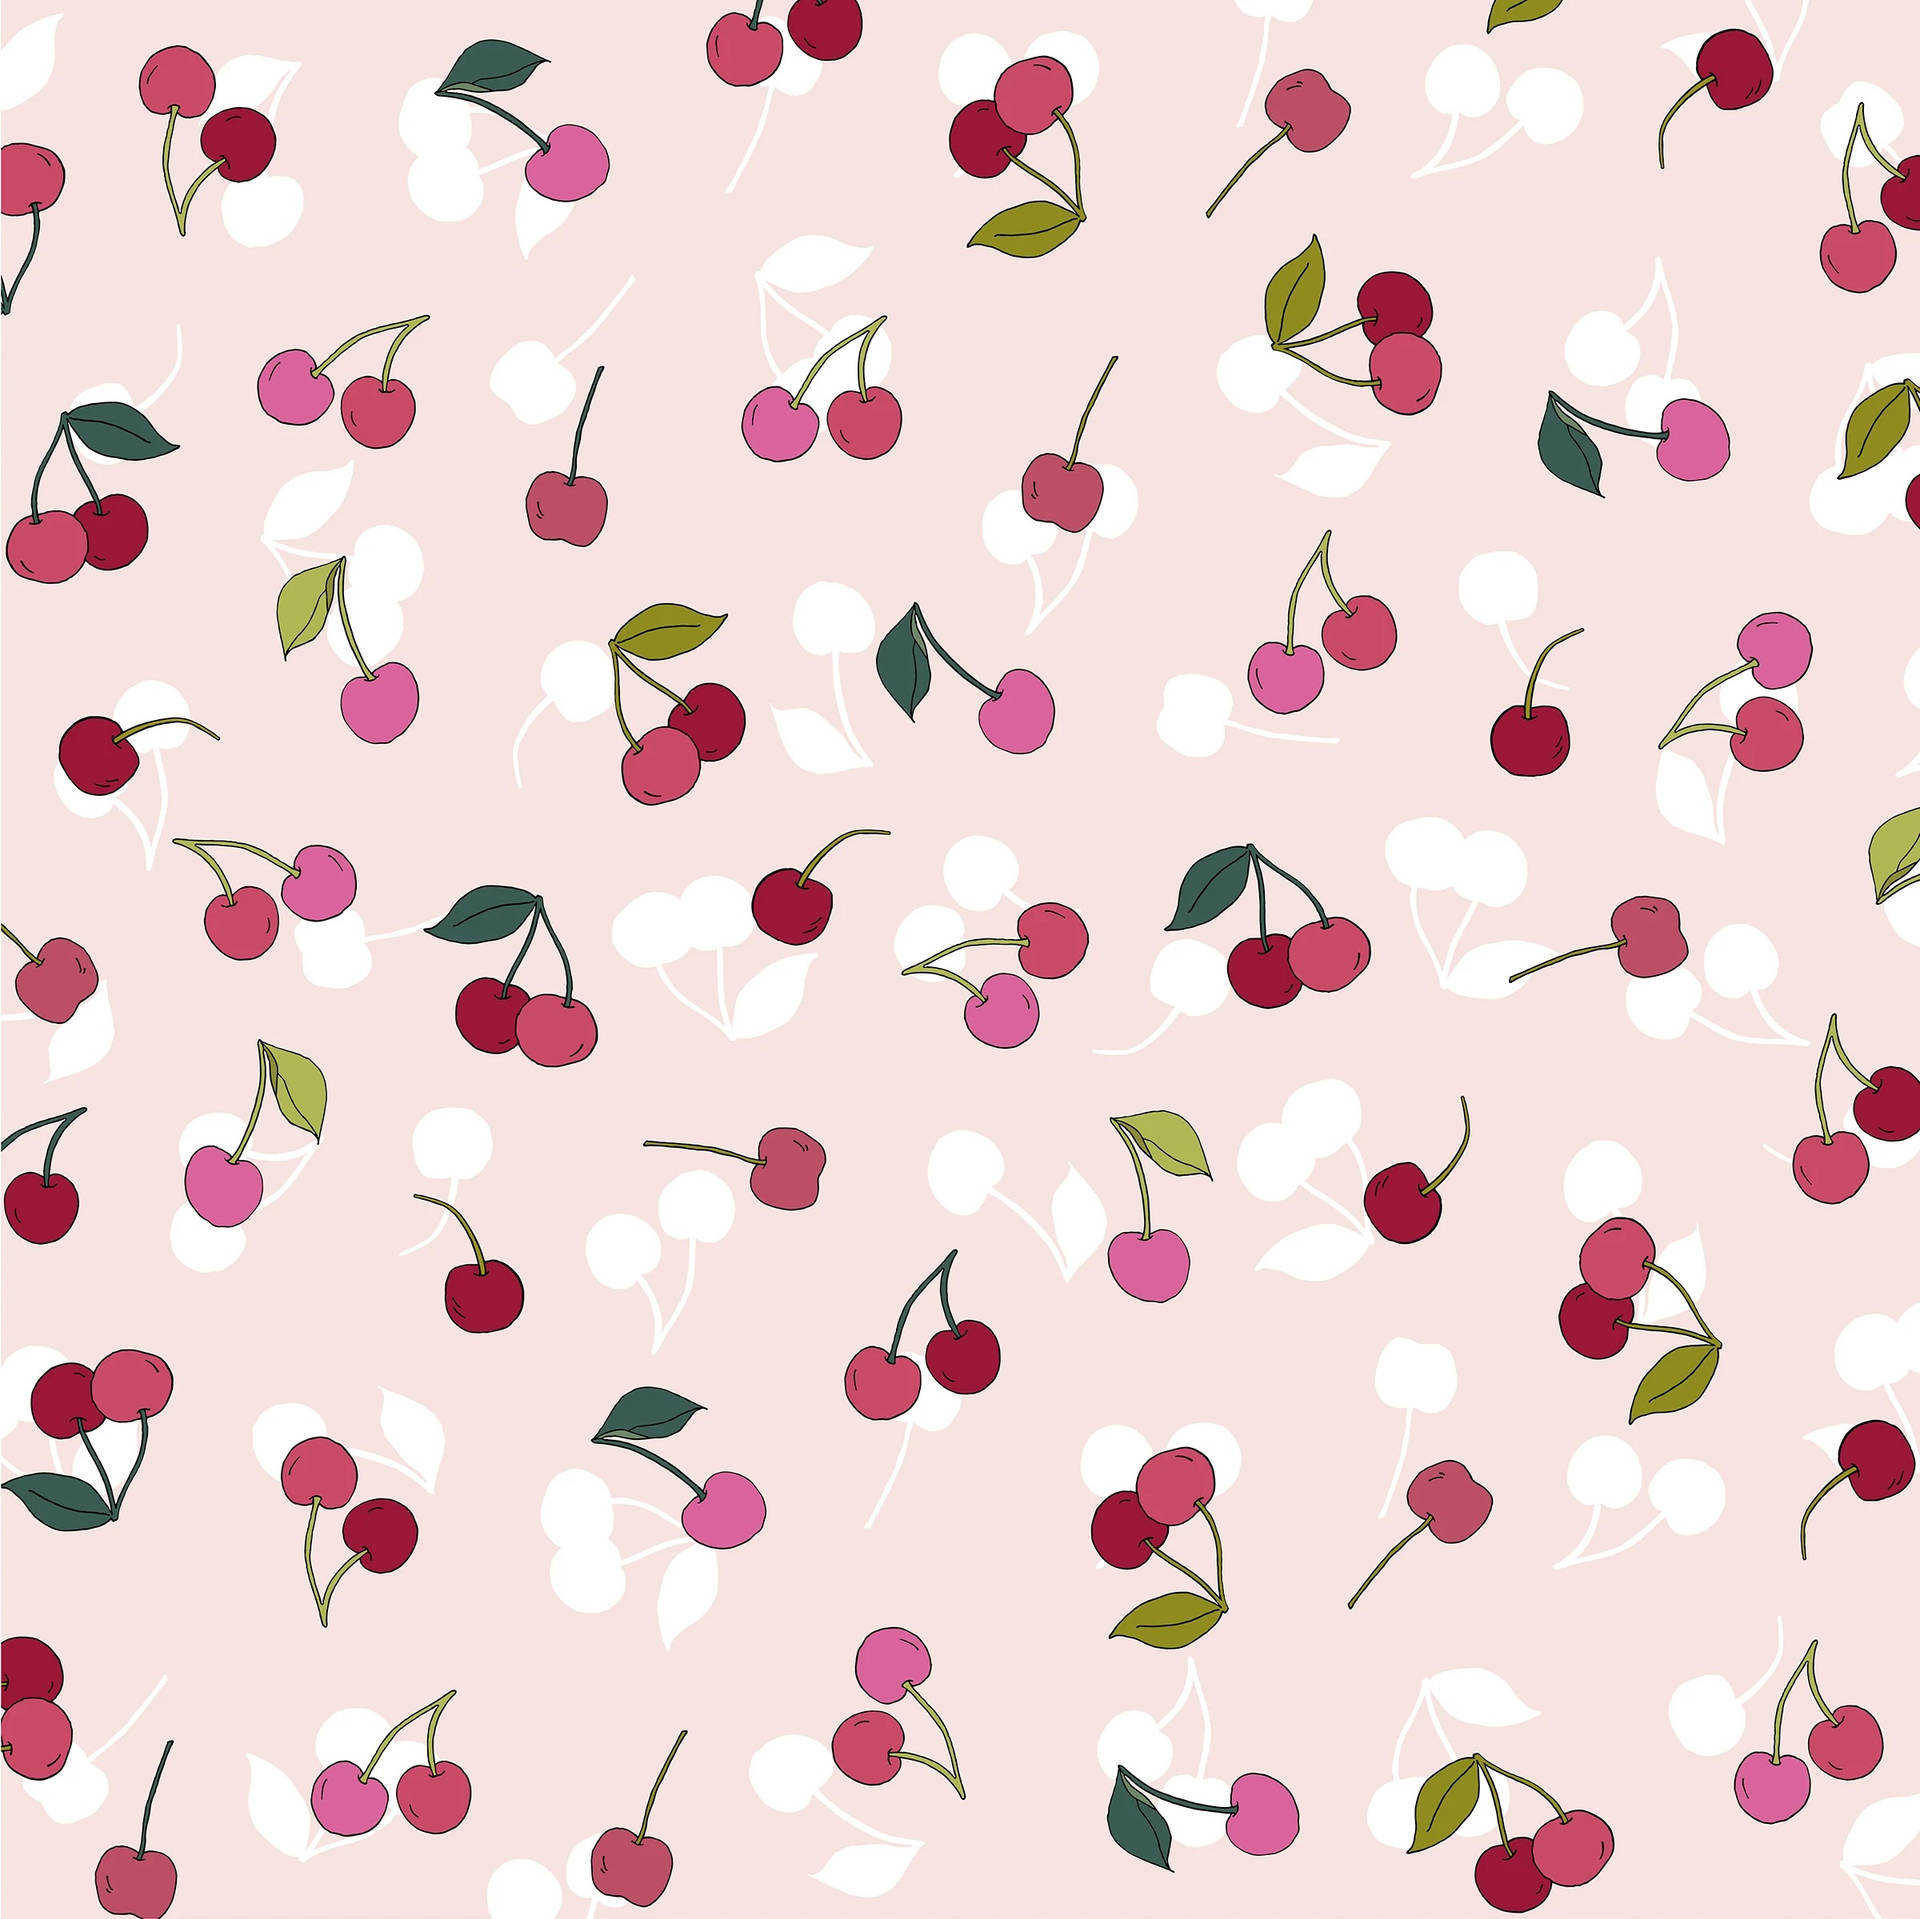 Ipad Pro Cute Cherry Fruits Picture